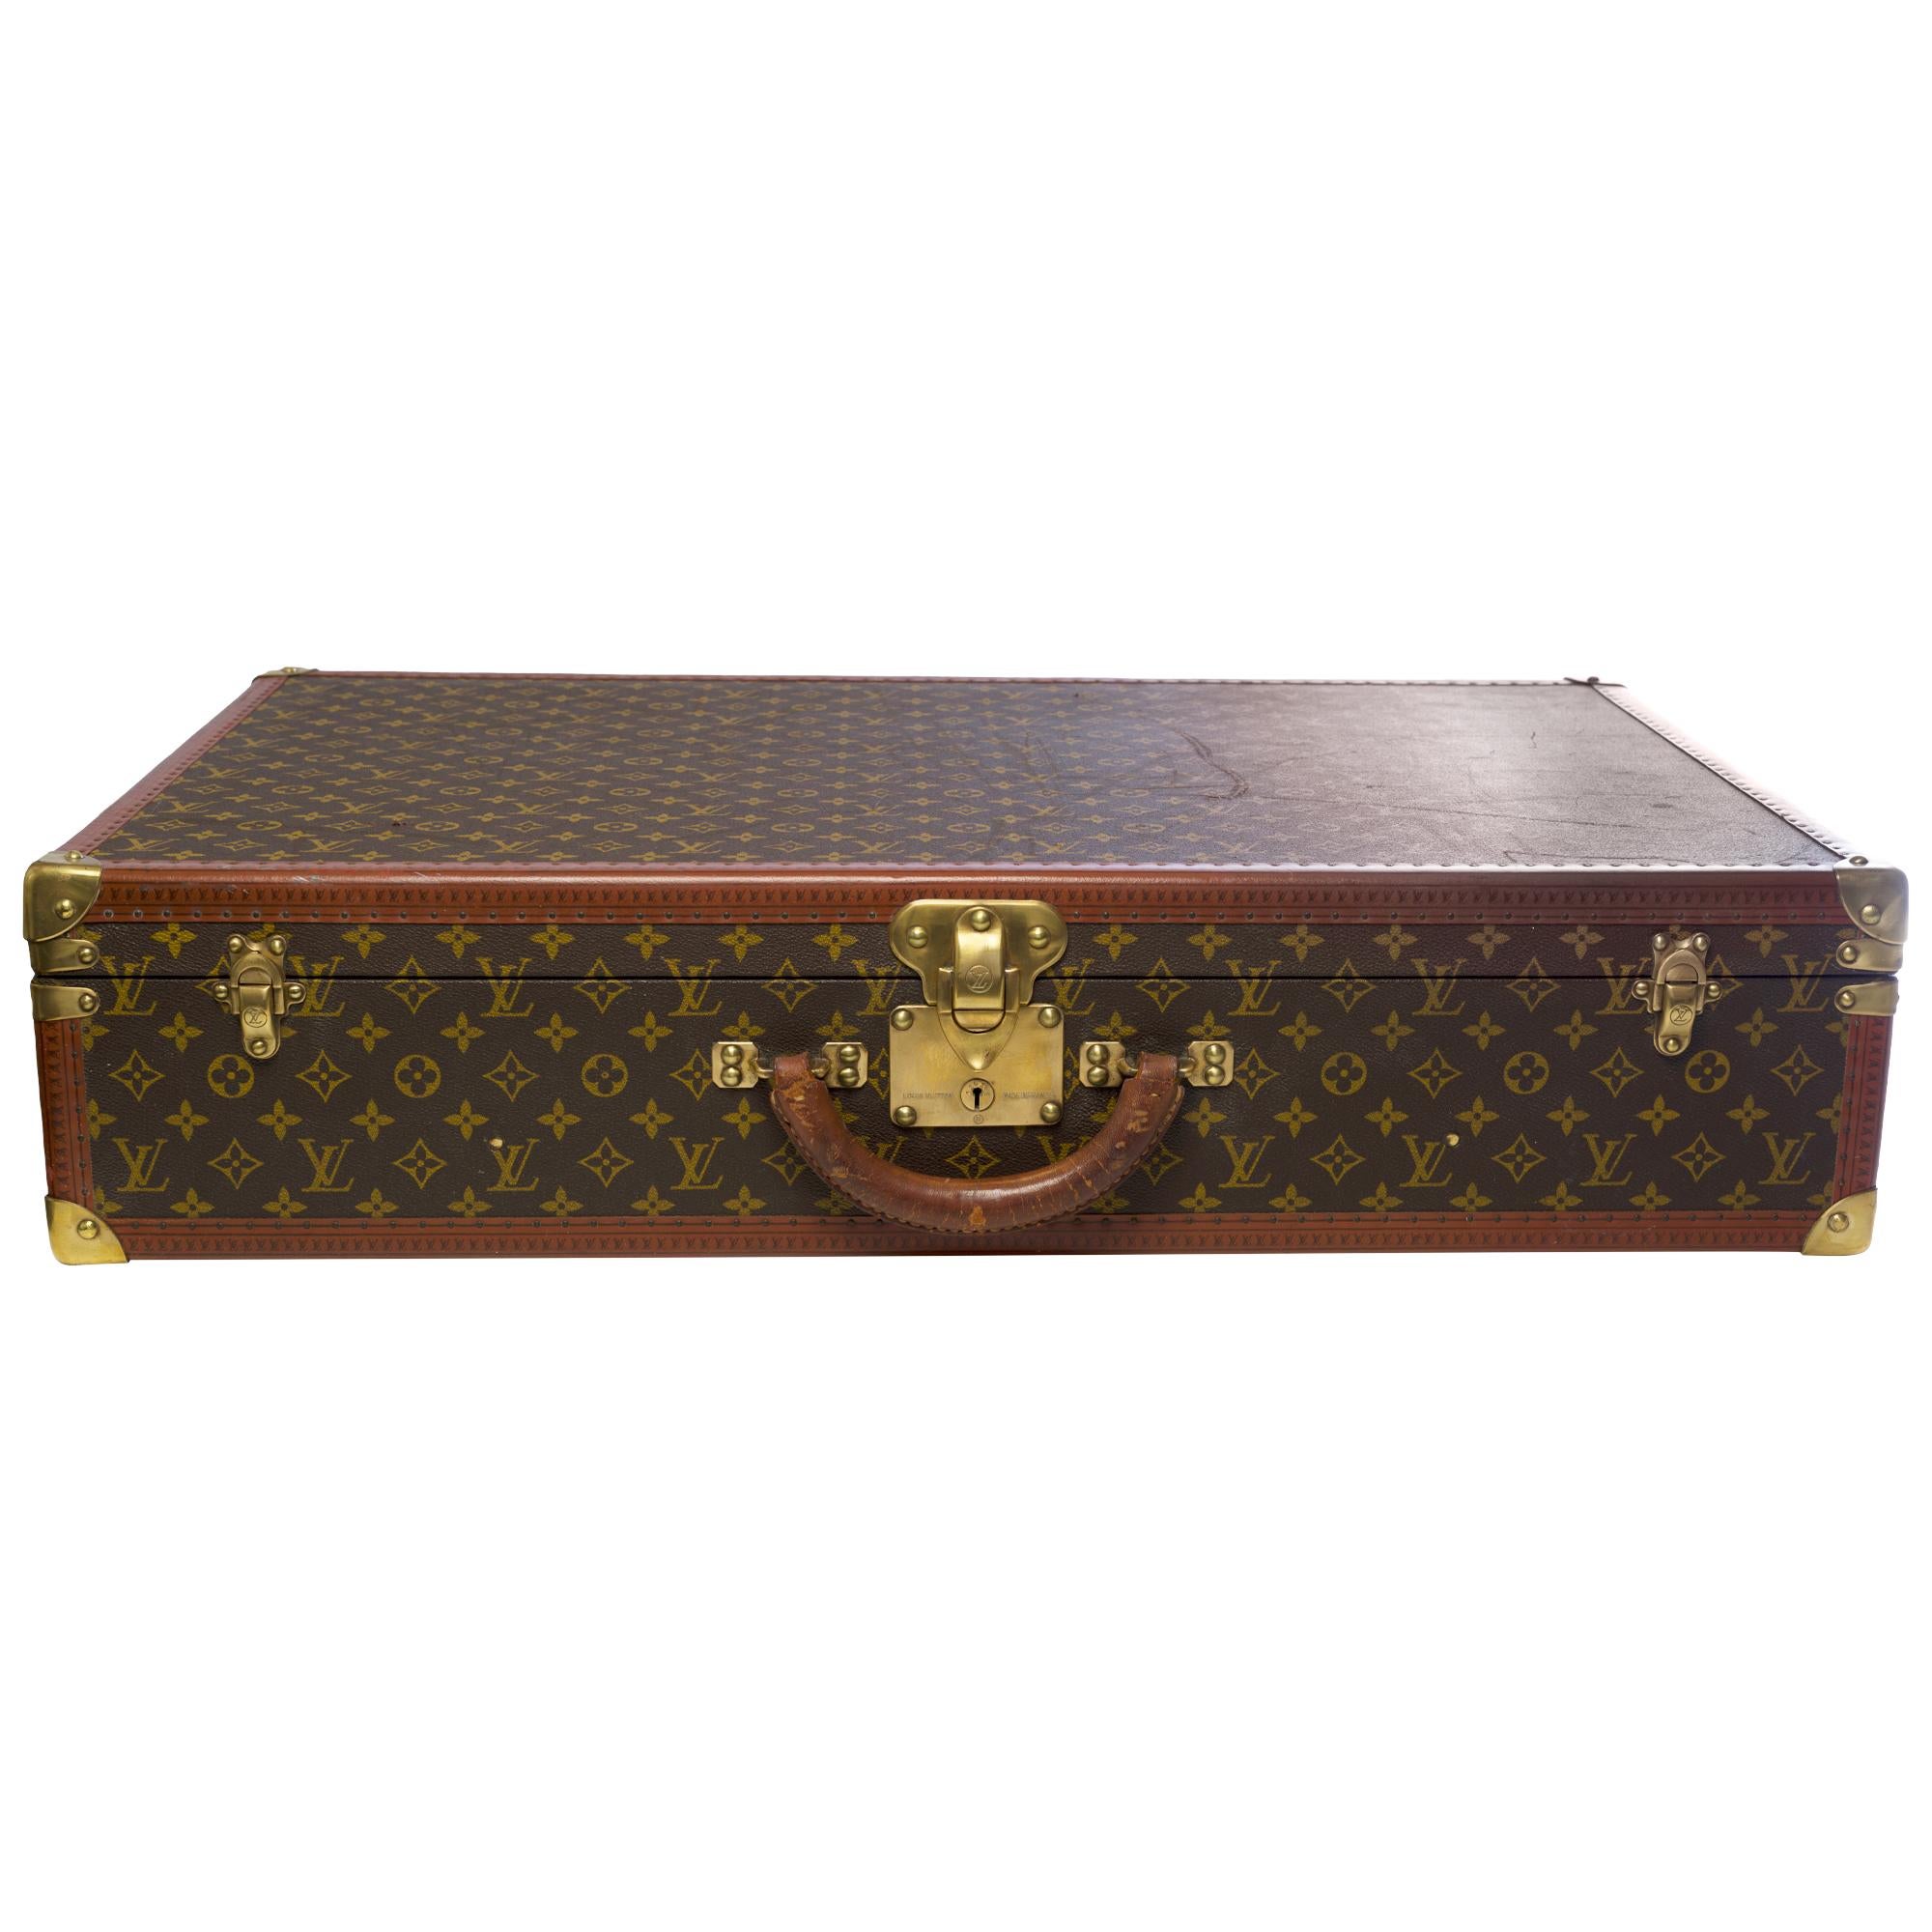 Beautiful decorative and collectible object:

Lovely Louis Vuitton Alzer 80 suitcase in monogram canvas and brown lozine, brass trim, natural leather handle allowing a handheld.

Three brass clasps.
Lining in beige canvas, two straps to hold